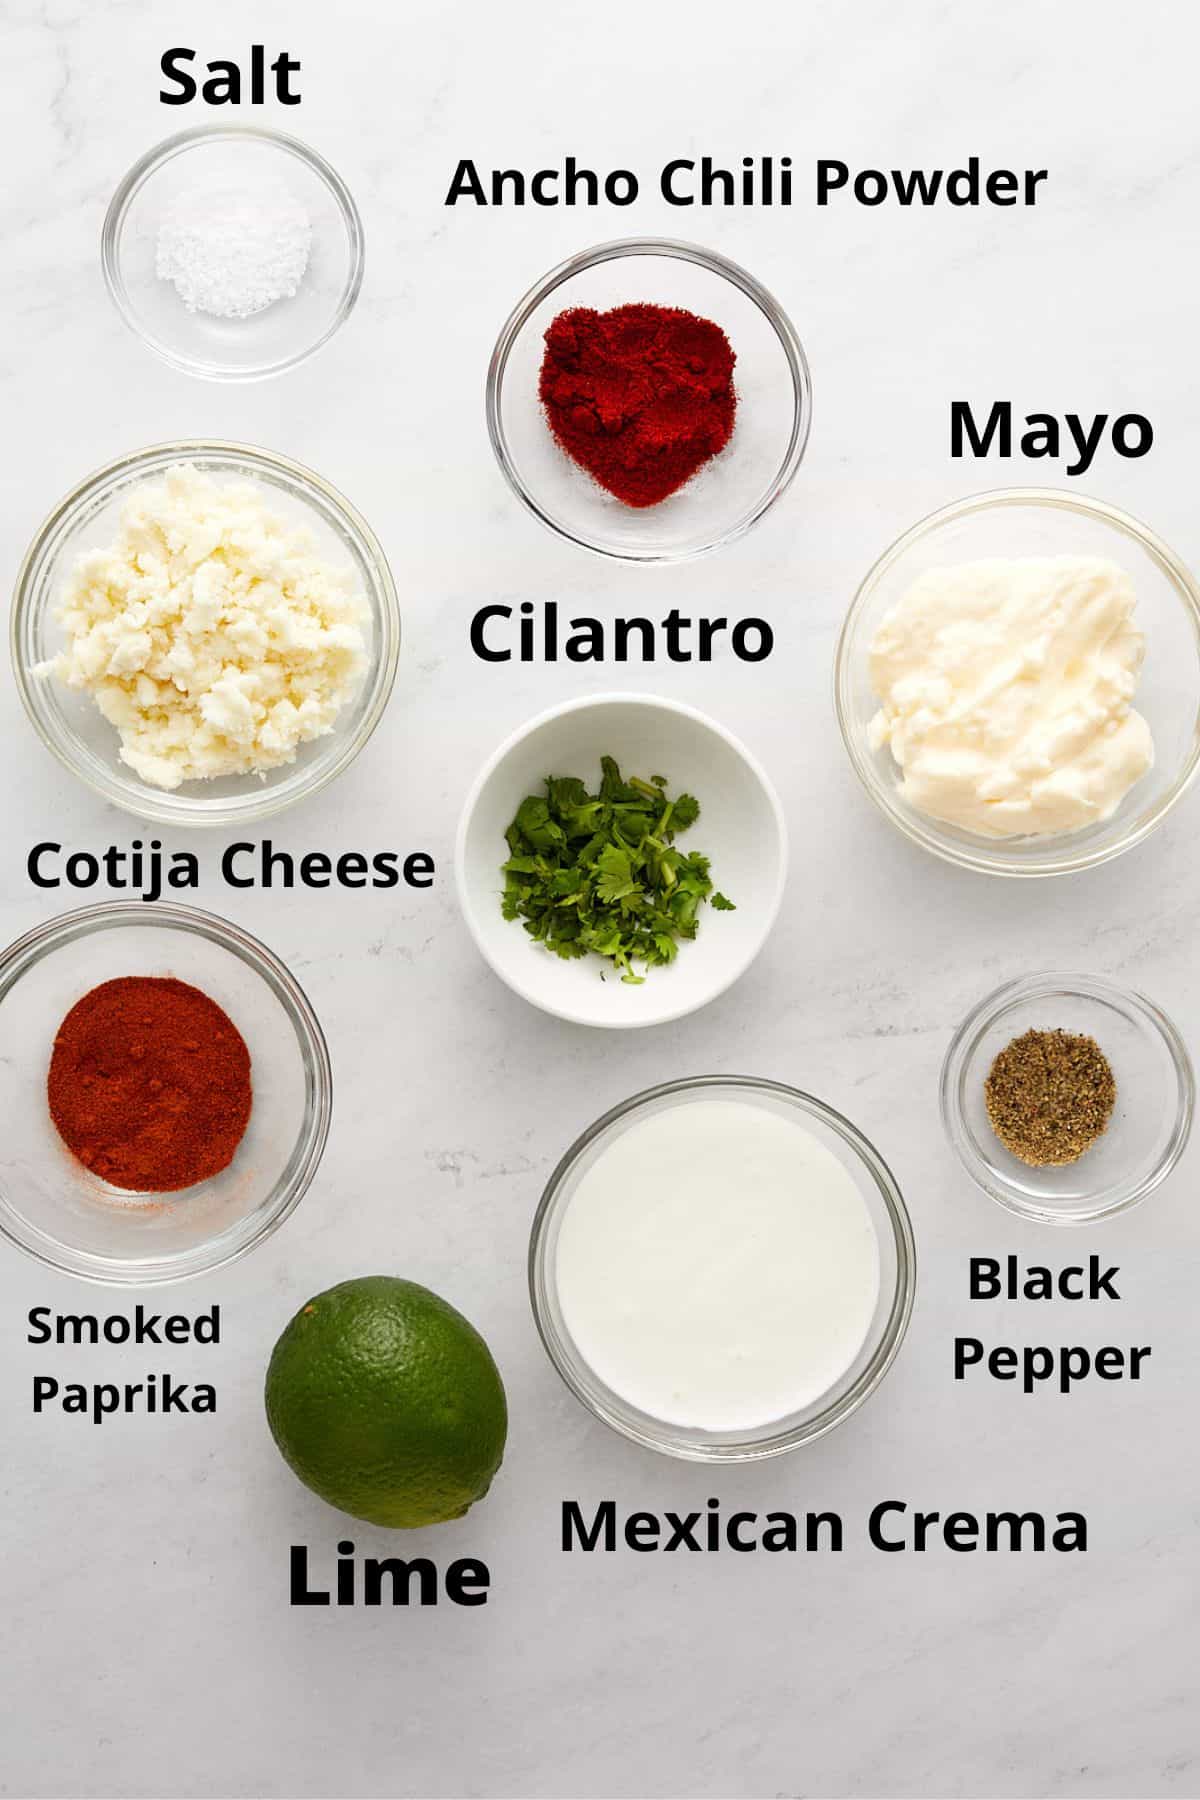 Recipe ingredients in glass and white bowls on white tabletop.